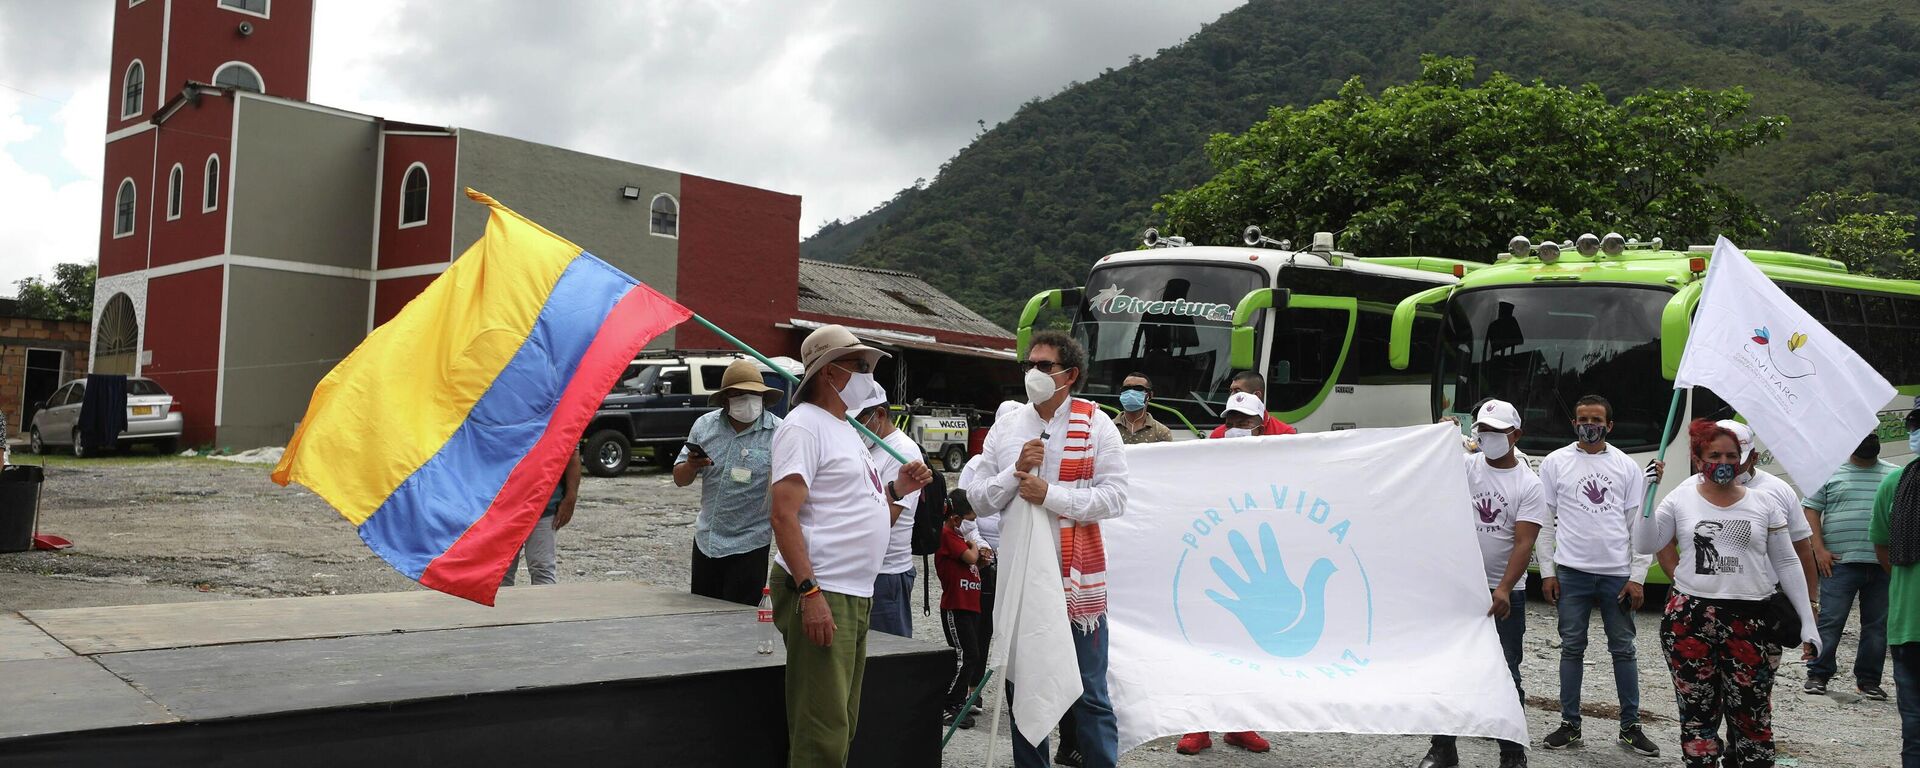 Former rebel commanders and current members of the FARC political party, Pastor Alape, second from left, and Rodrigo Granda, far left with Colombian flag, arrive for a ceremony to apologize to locals for the kidnappings carried out by the FARC over decades in the rural area of Pipiral near Villavicencio, Colombia, Thursday, Oct. 29, 2020. Ex-combatants and social organizations plan to march to Bogota this weekend to demand the government guarantee their right to life and compliance with the 2016 peace agreement, amid hundreds of subsequent ex-rebel deaths. - Sputnik International, 1920, 24.11.2021